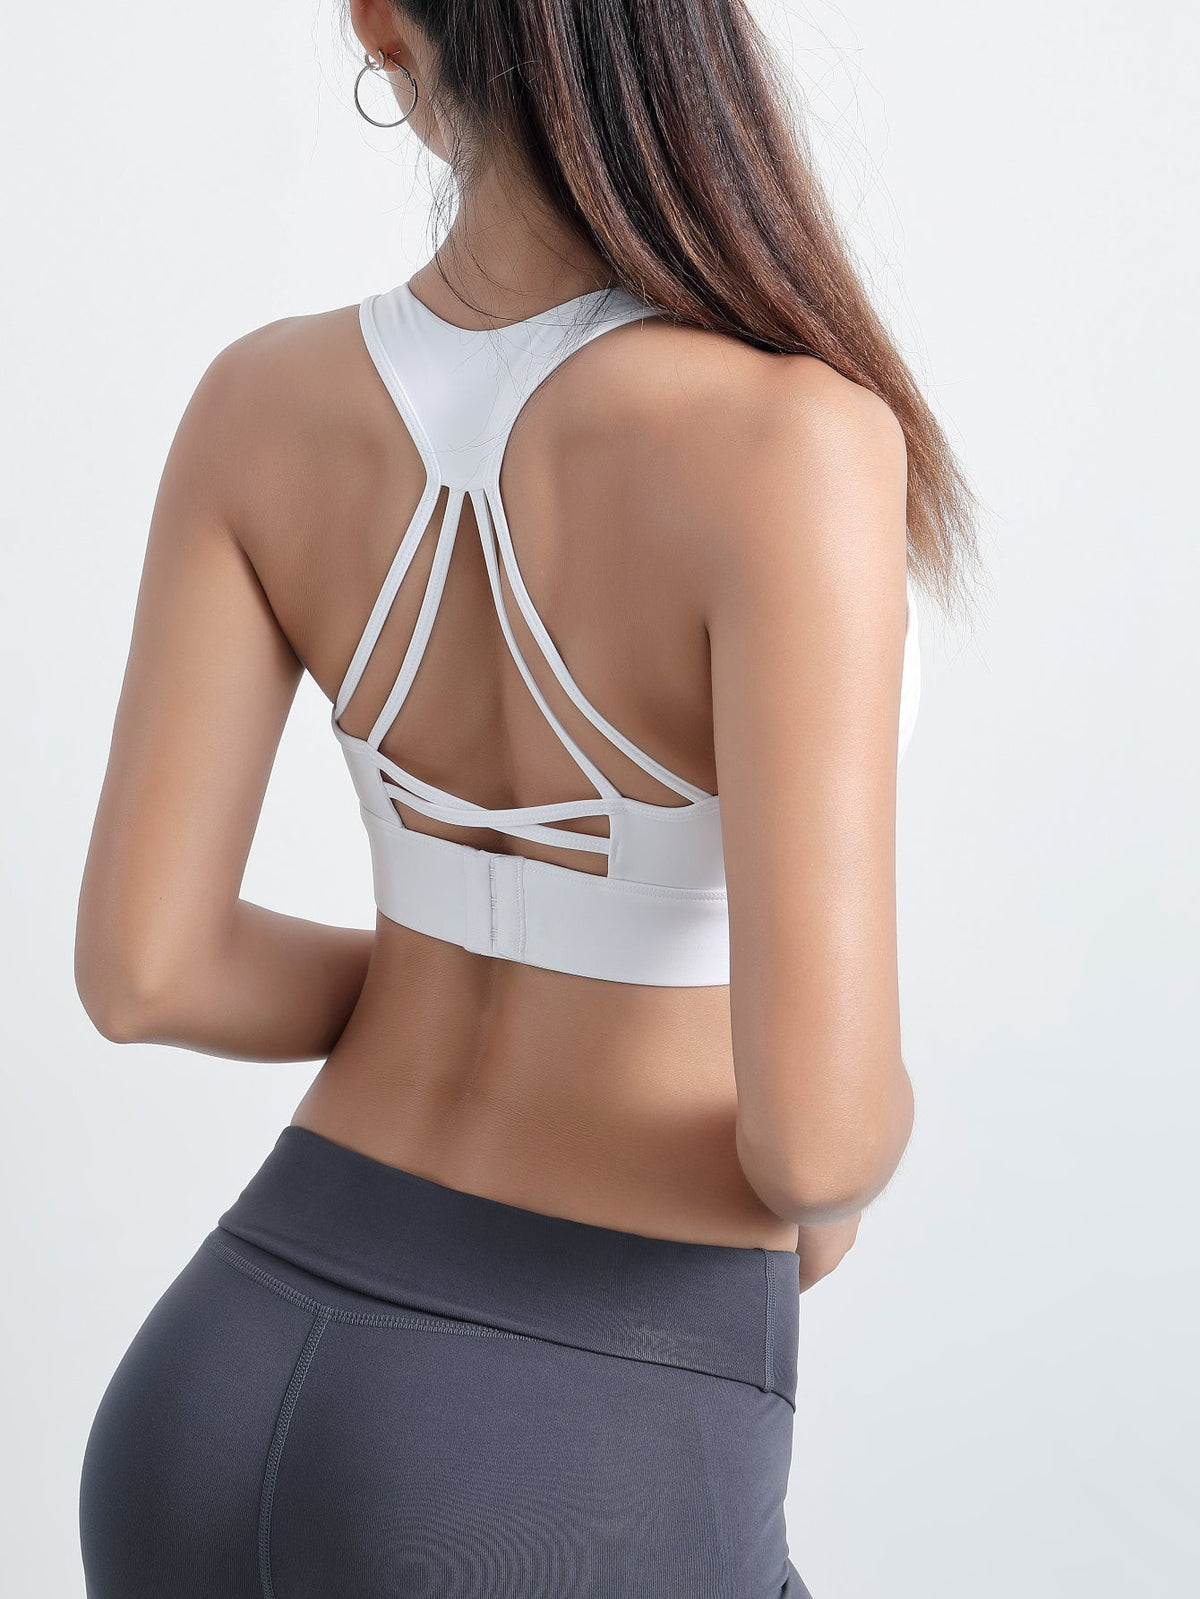 Sports Bra for Women Criss-Cross Back Padded Strappy Sports Bras  Yoga Bra with Removable Cups Sai Feel